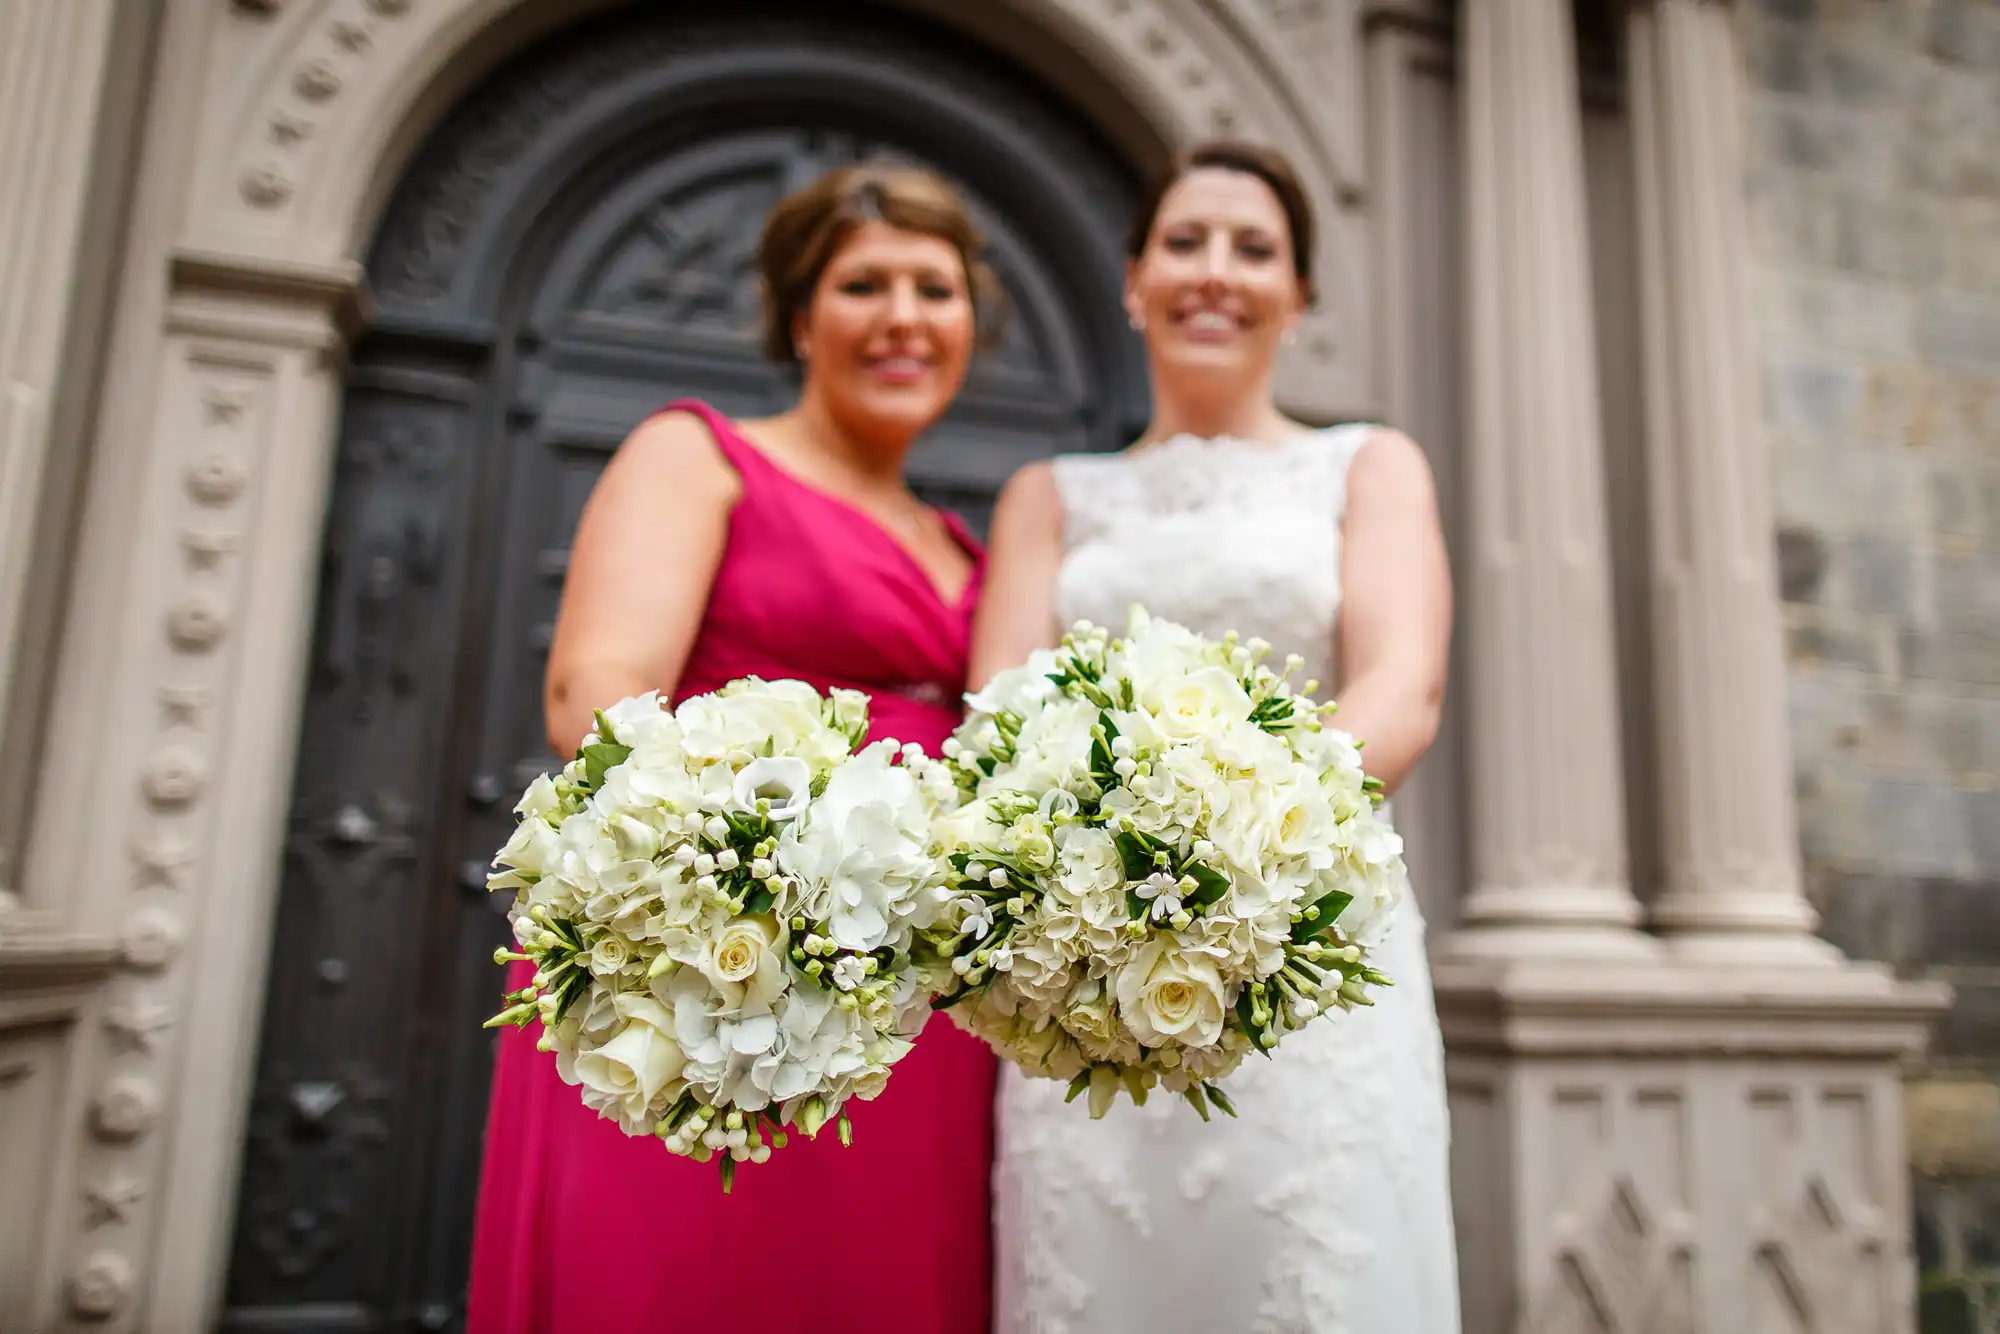 Two women, one in a pink dress and the other in a white wedding gown, holding bouquets and standing in front of an ornate church door.